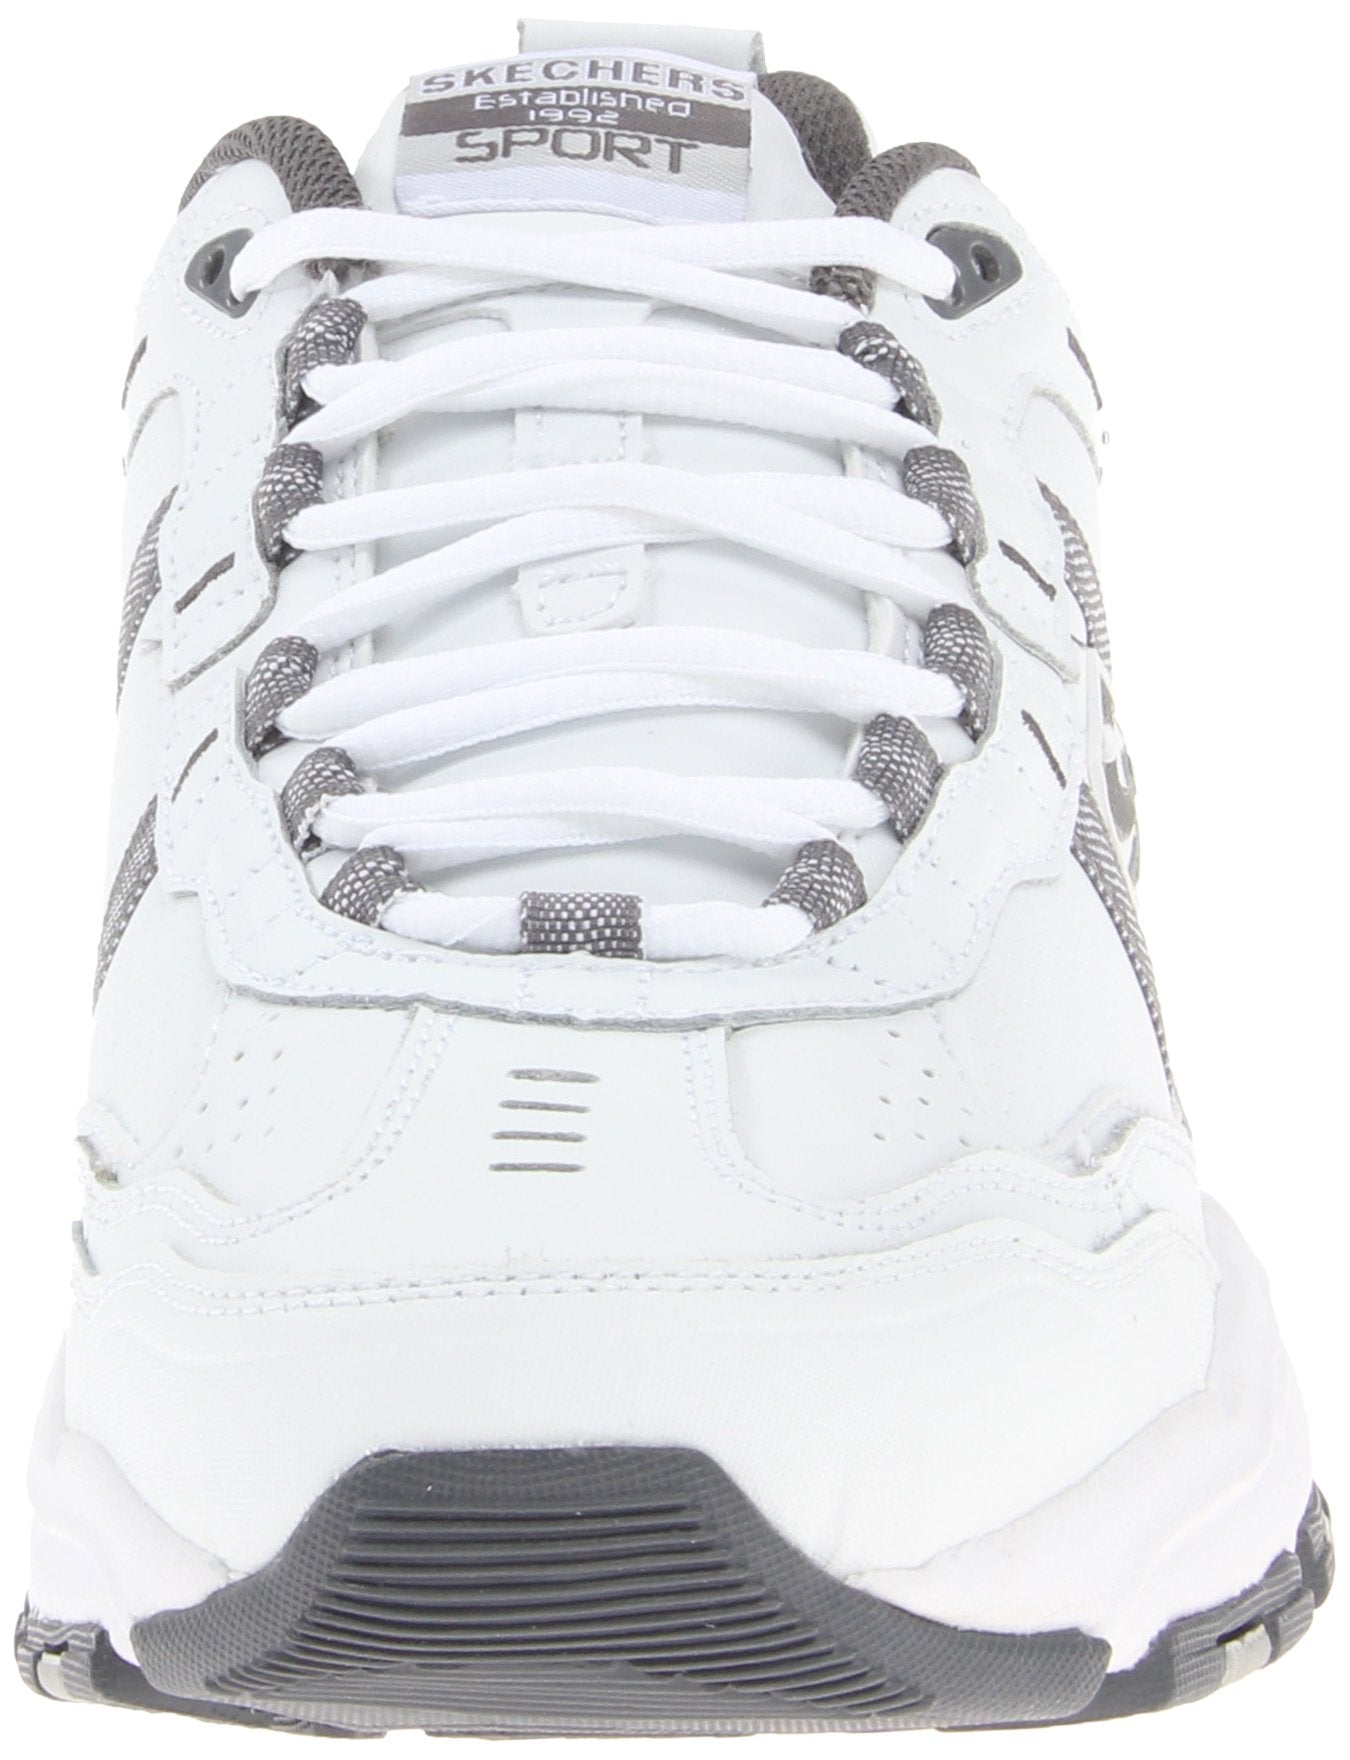 Skechers Men's White And Charcoal Low-top Sneaker - 9.5 D(M) US